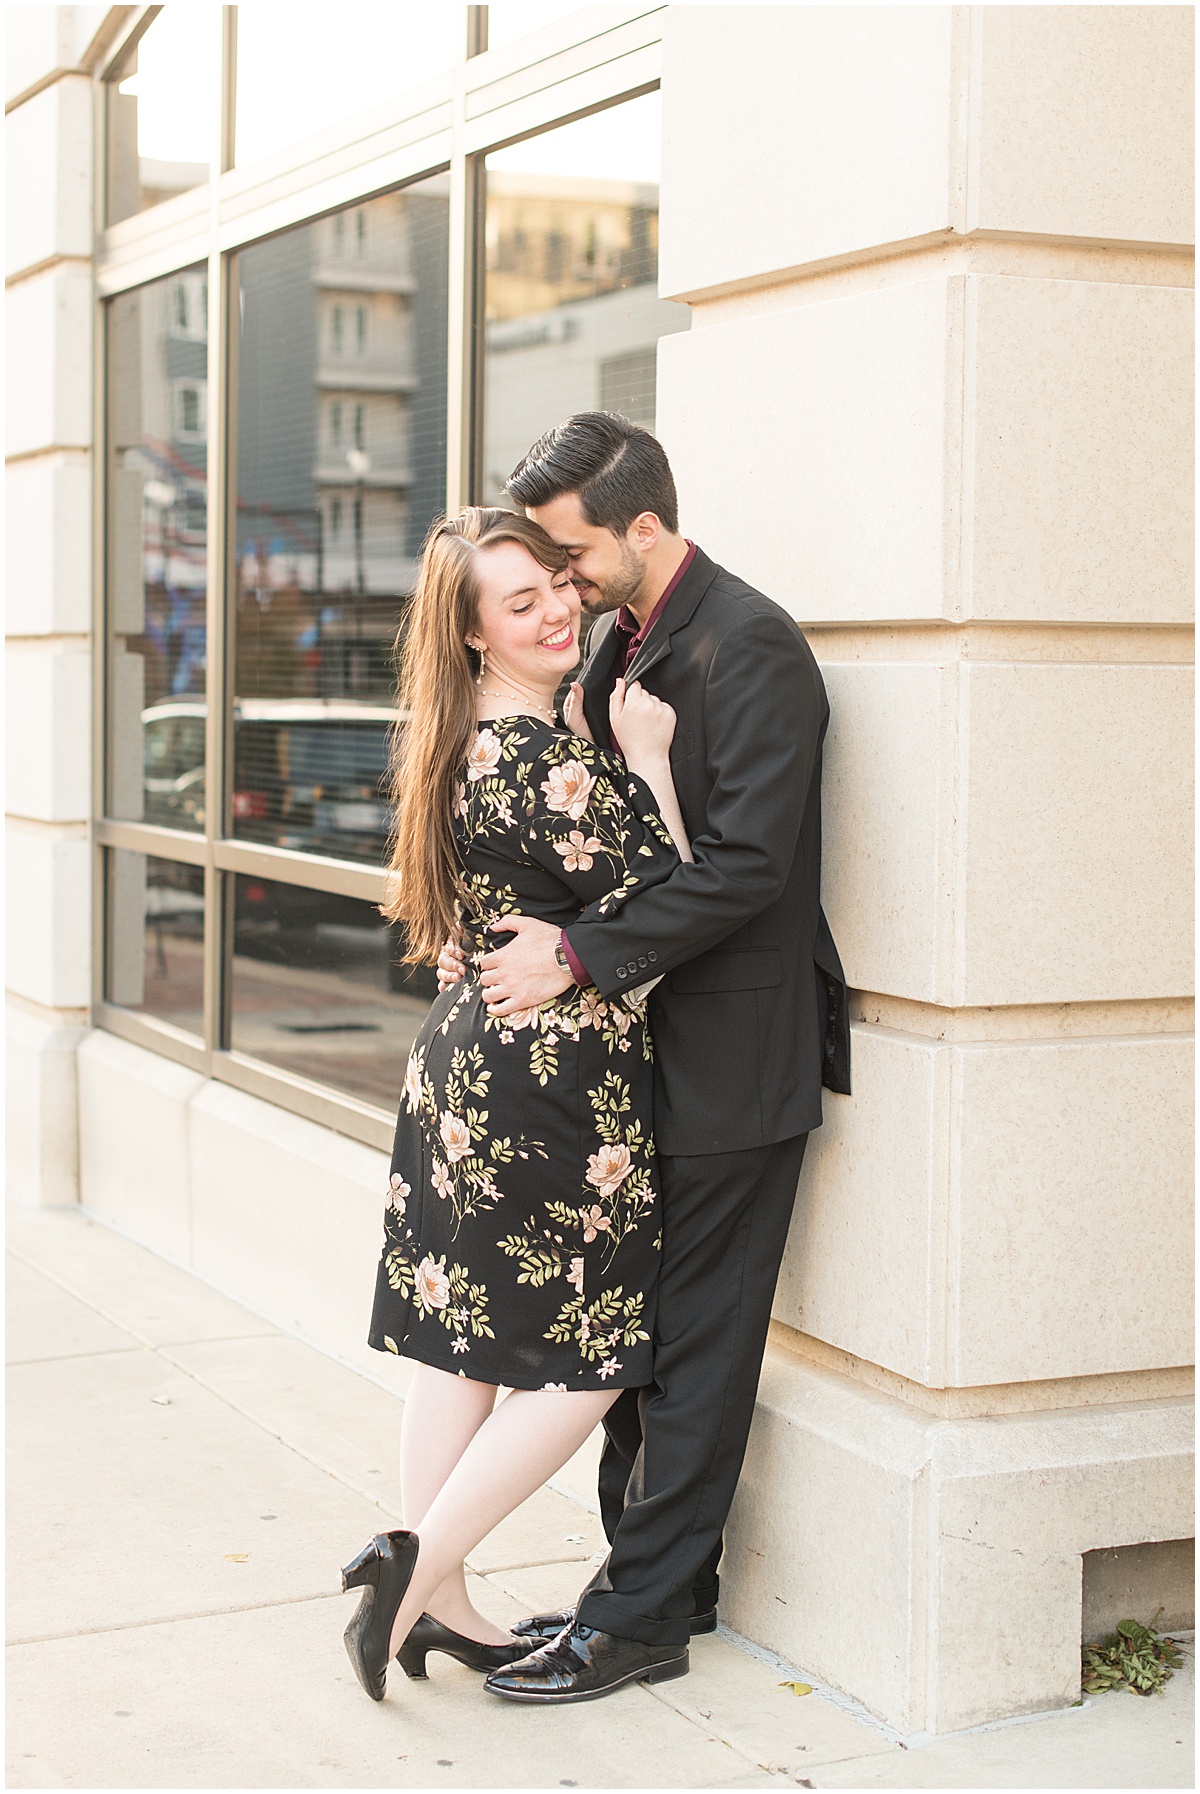 Nick Ballester and Madeline Pingel Engagement Session in Downtown Lafayette Indiana29.jpg